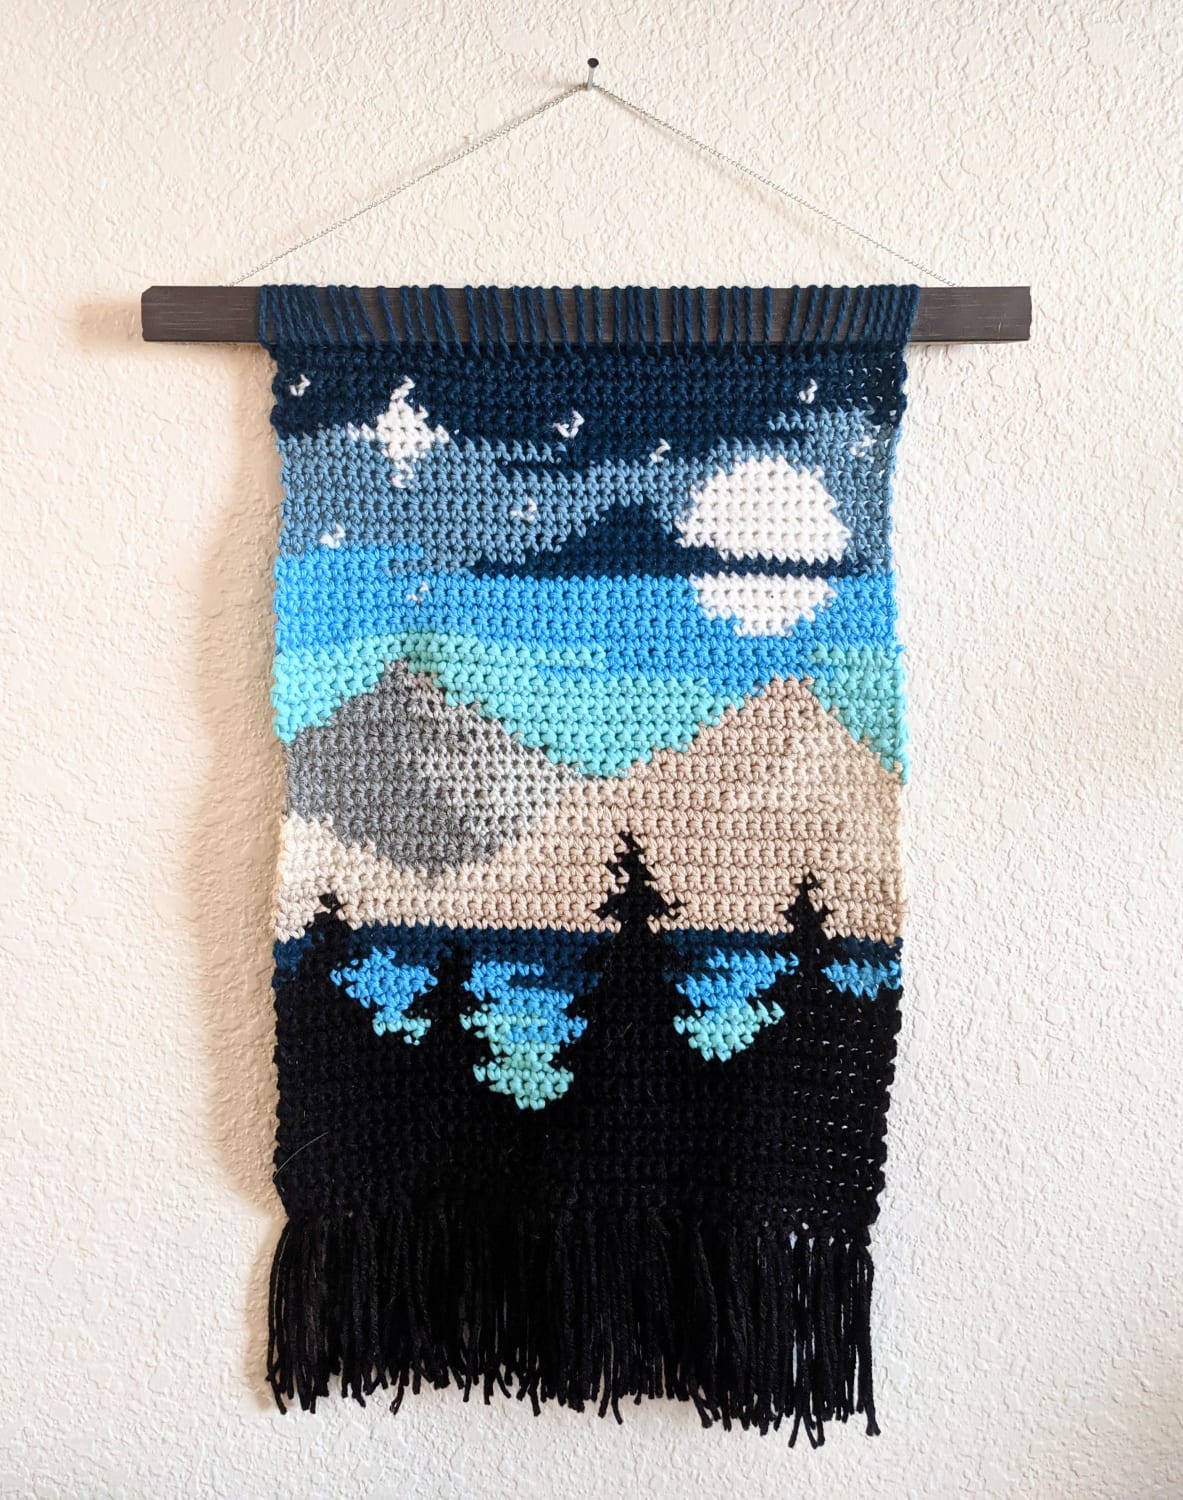 A house warming gift for my mom who just moved out of the Rocky Mountains! Pattern by Love and Stitch Designs, bought on Etsy.